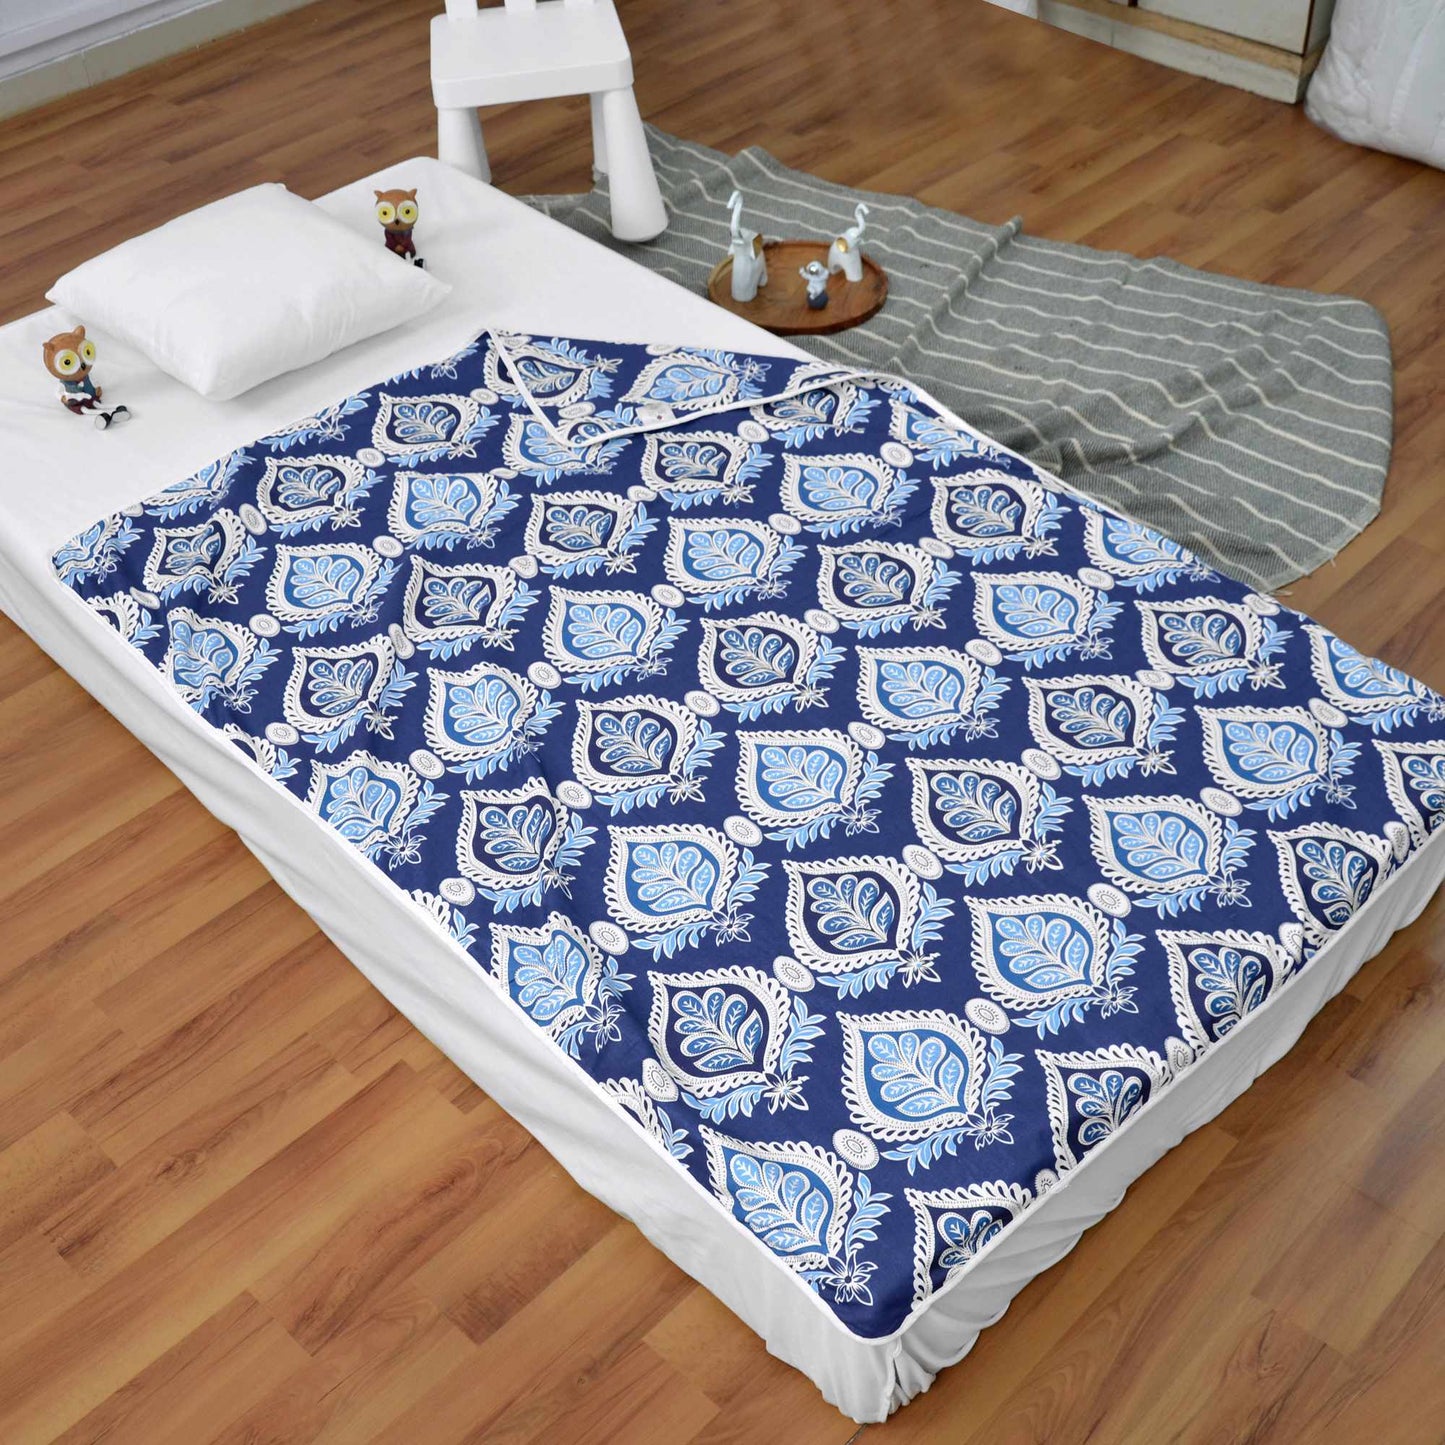 Blue and White Cotton 120 GSM Ultrasoft Reversible Single Baby Blanket for Babies